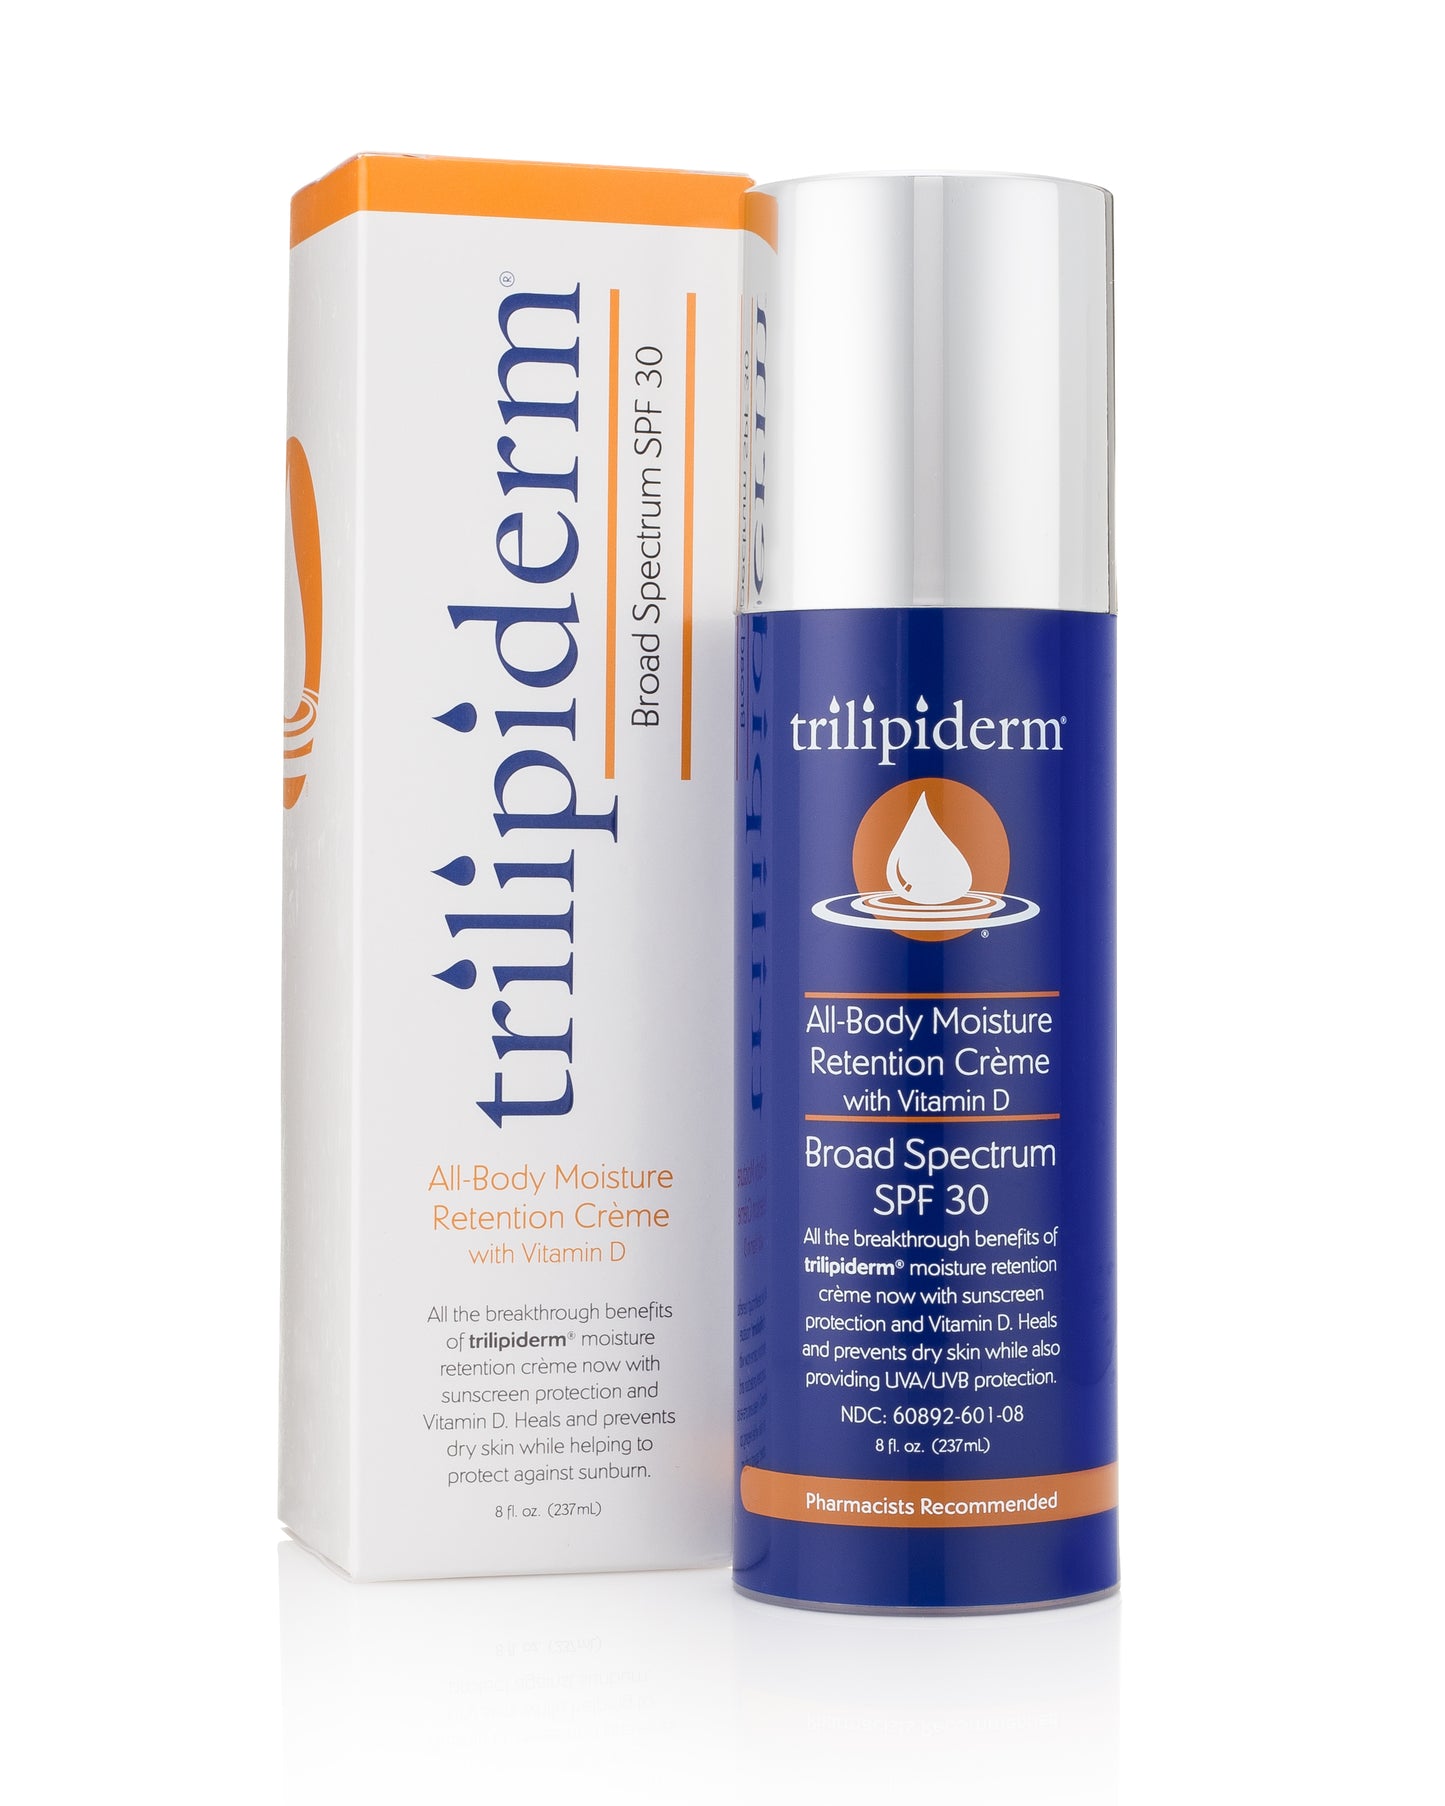 Broad Spectrum SPF 30 with Vitamin D